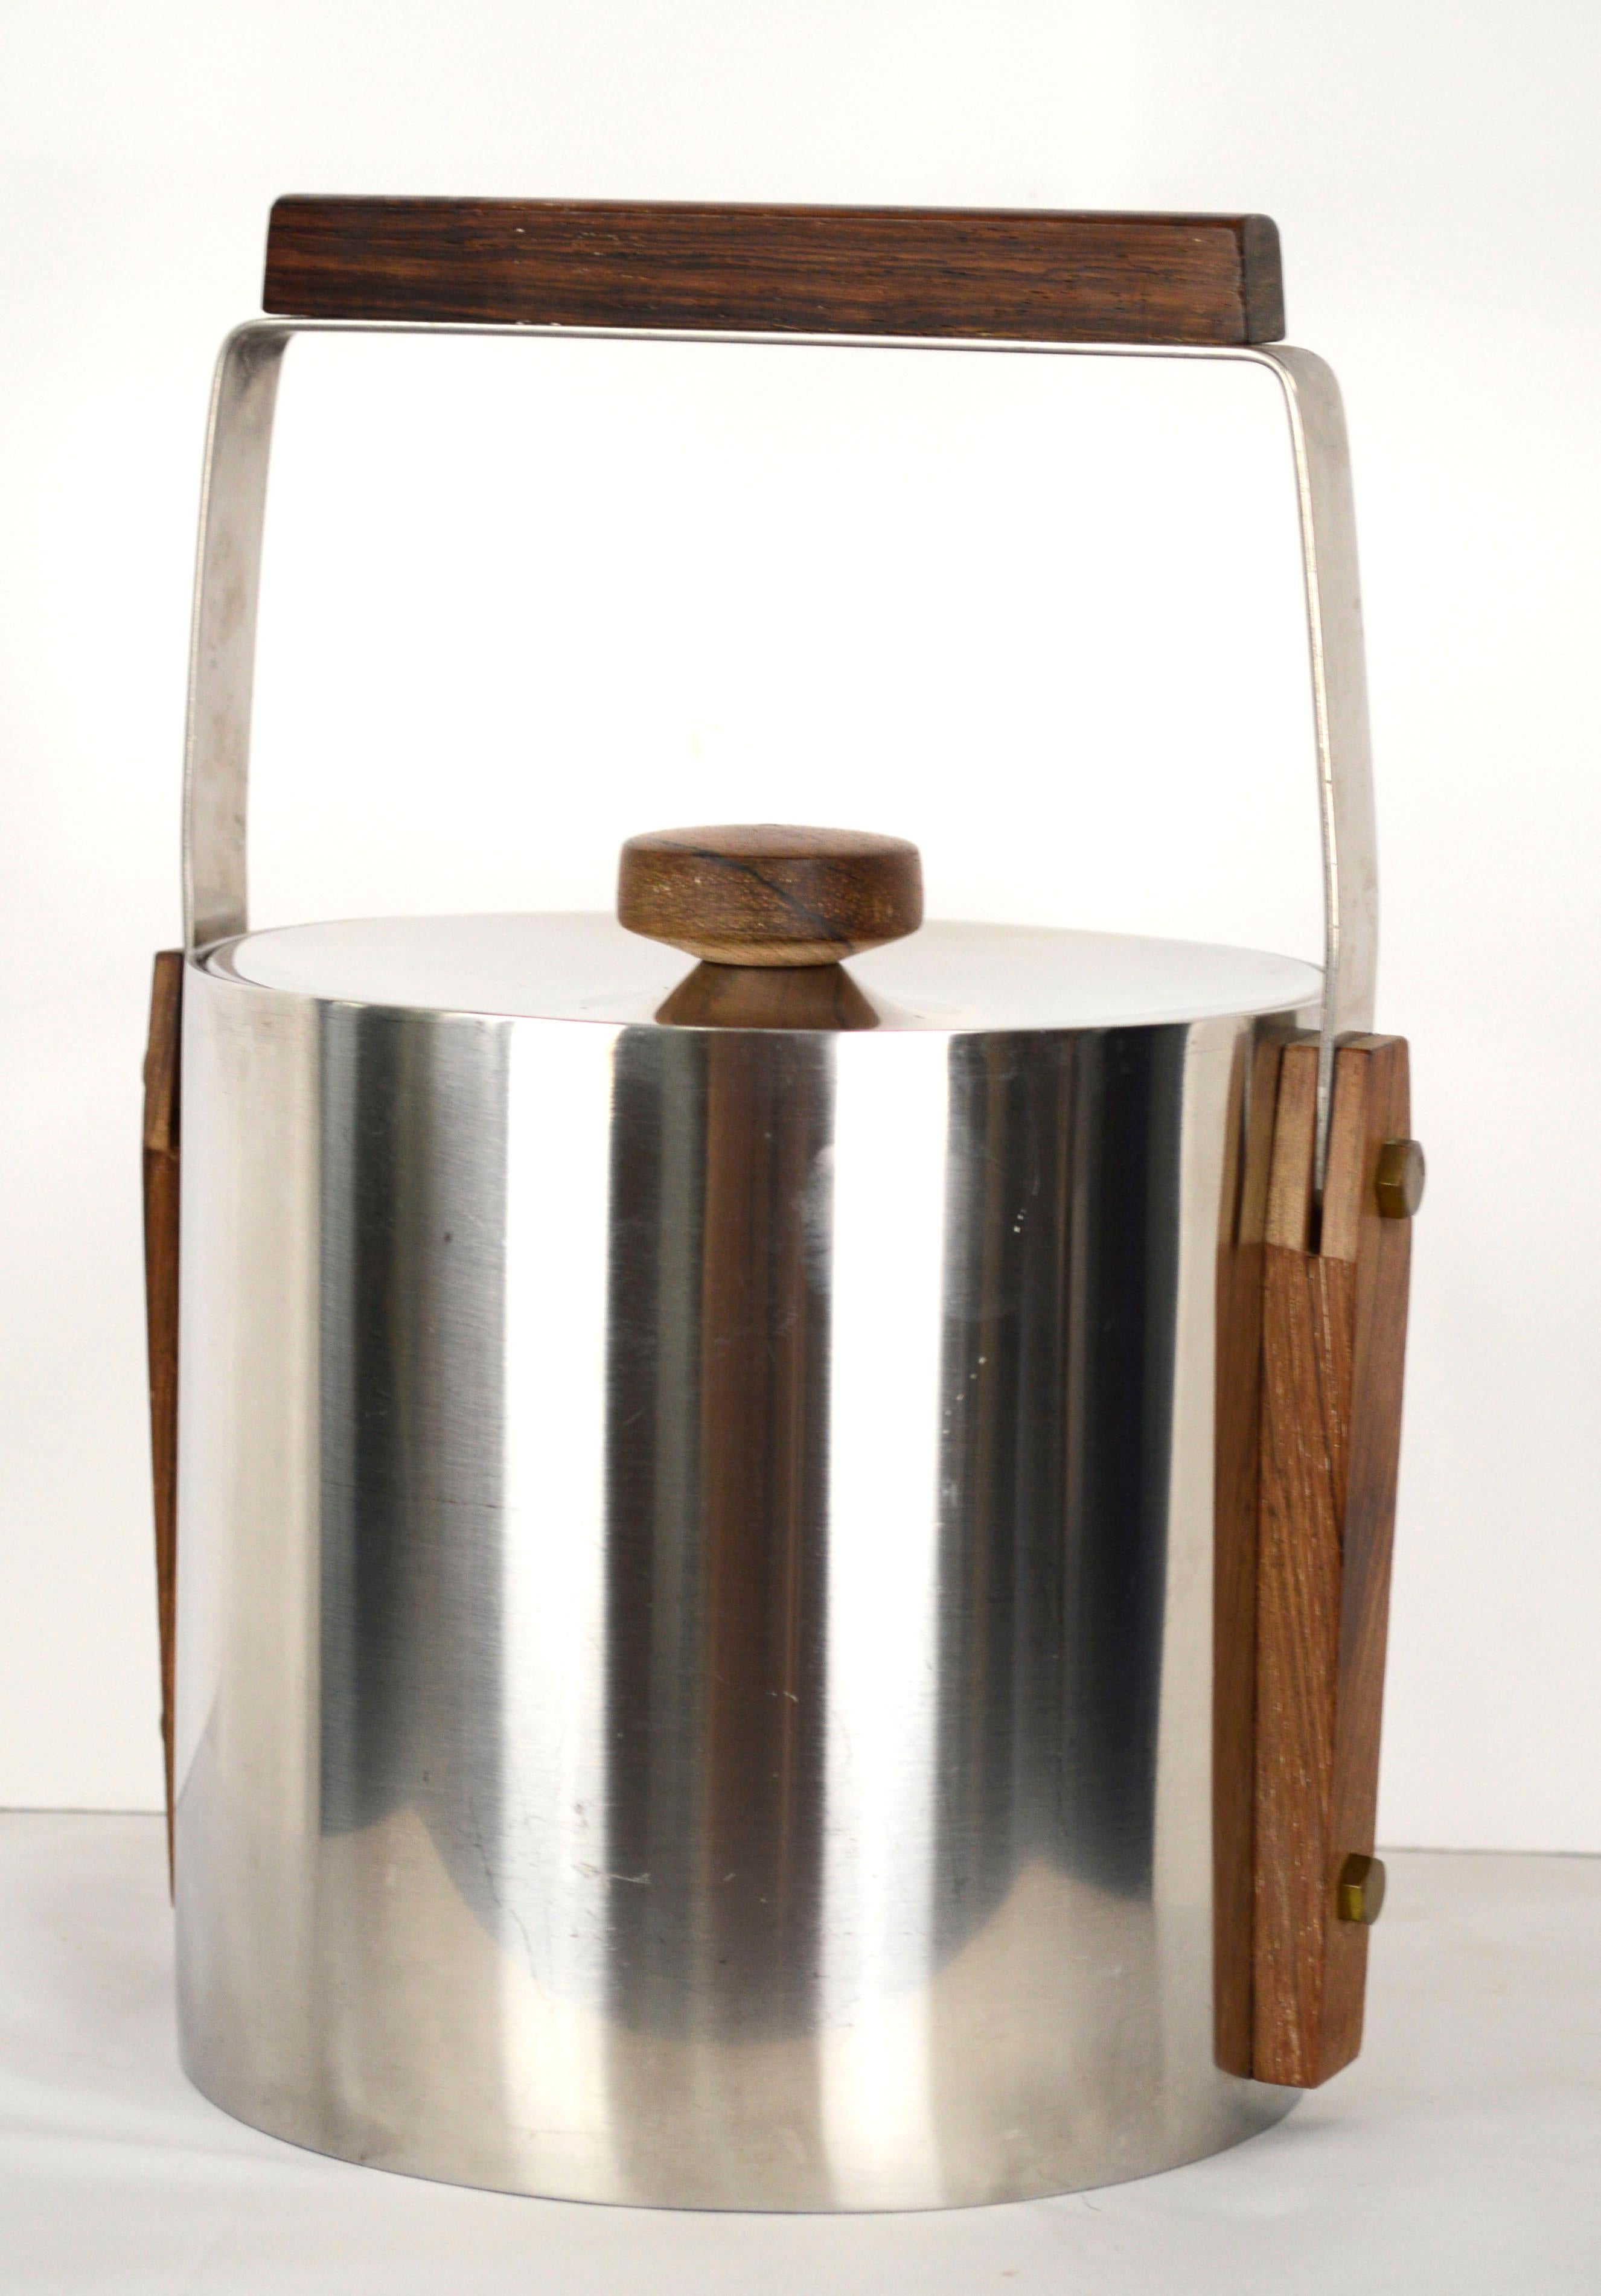 Mid Century Modern Scandinavian Stainless Steel Ice Bucket, Cultura Sweden

Sleek and minimal Mid-Century Modern Scandinavian stainless steel ice bucket, with clean modern lines and beautiful walnut wood handles and details, by Cultura Sweden.